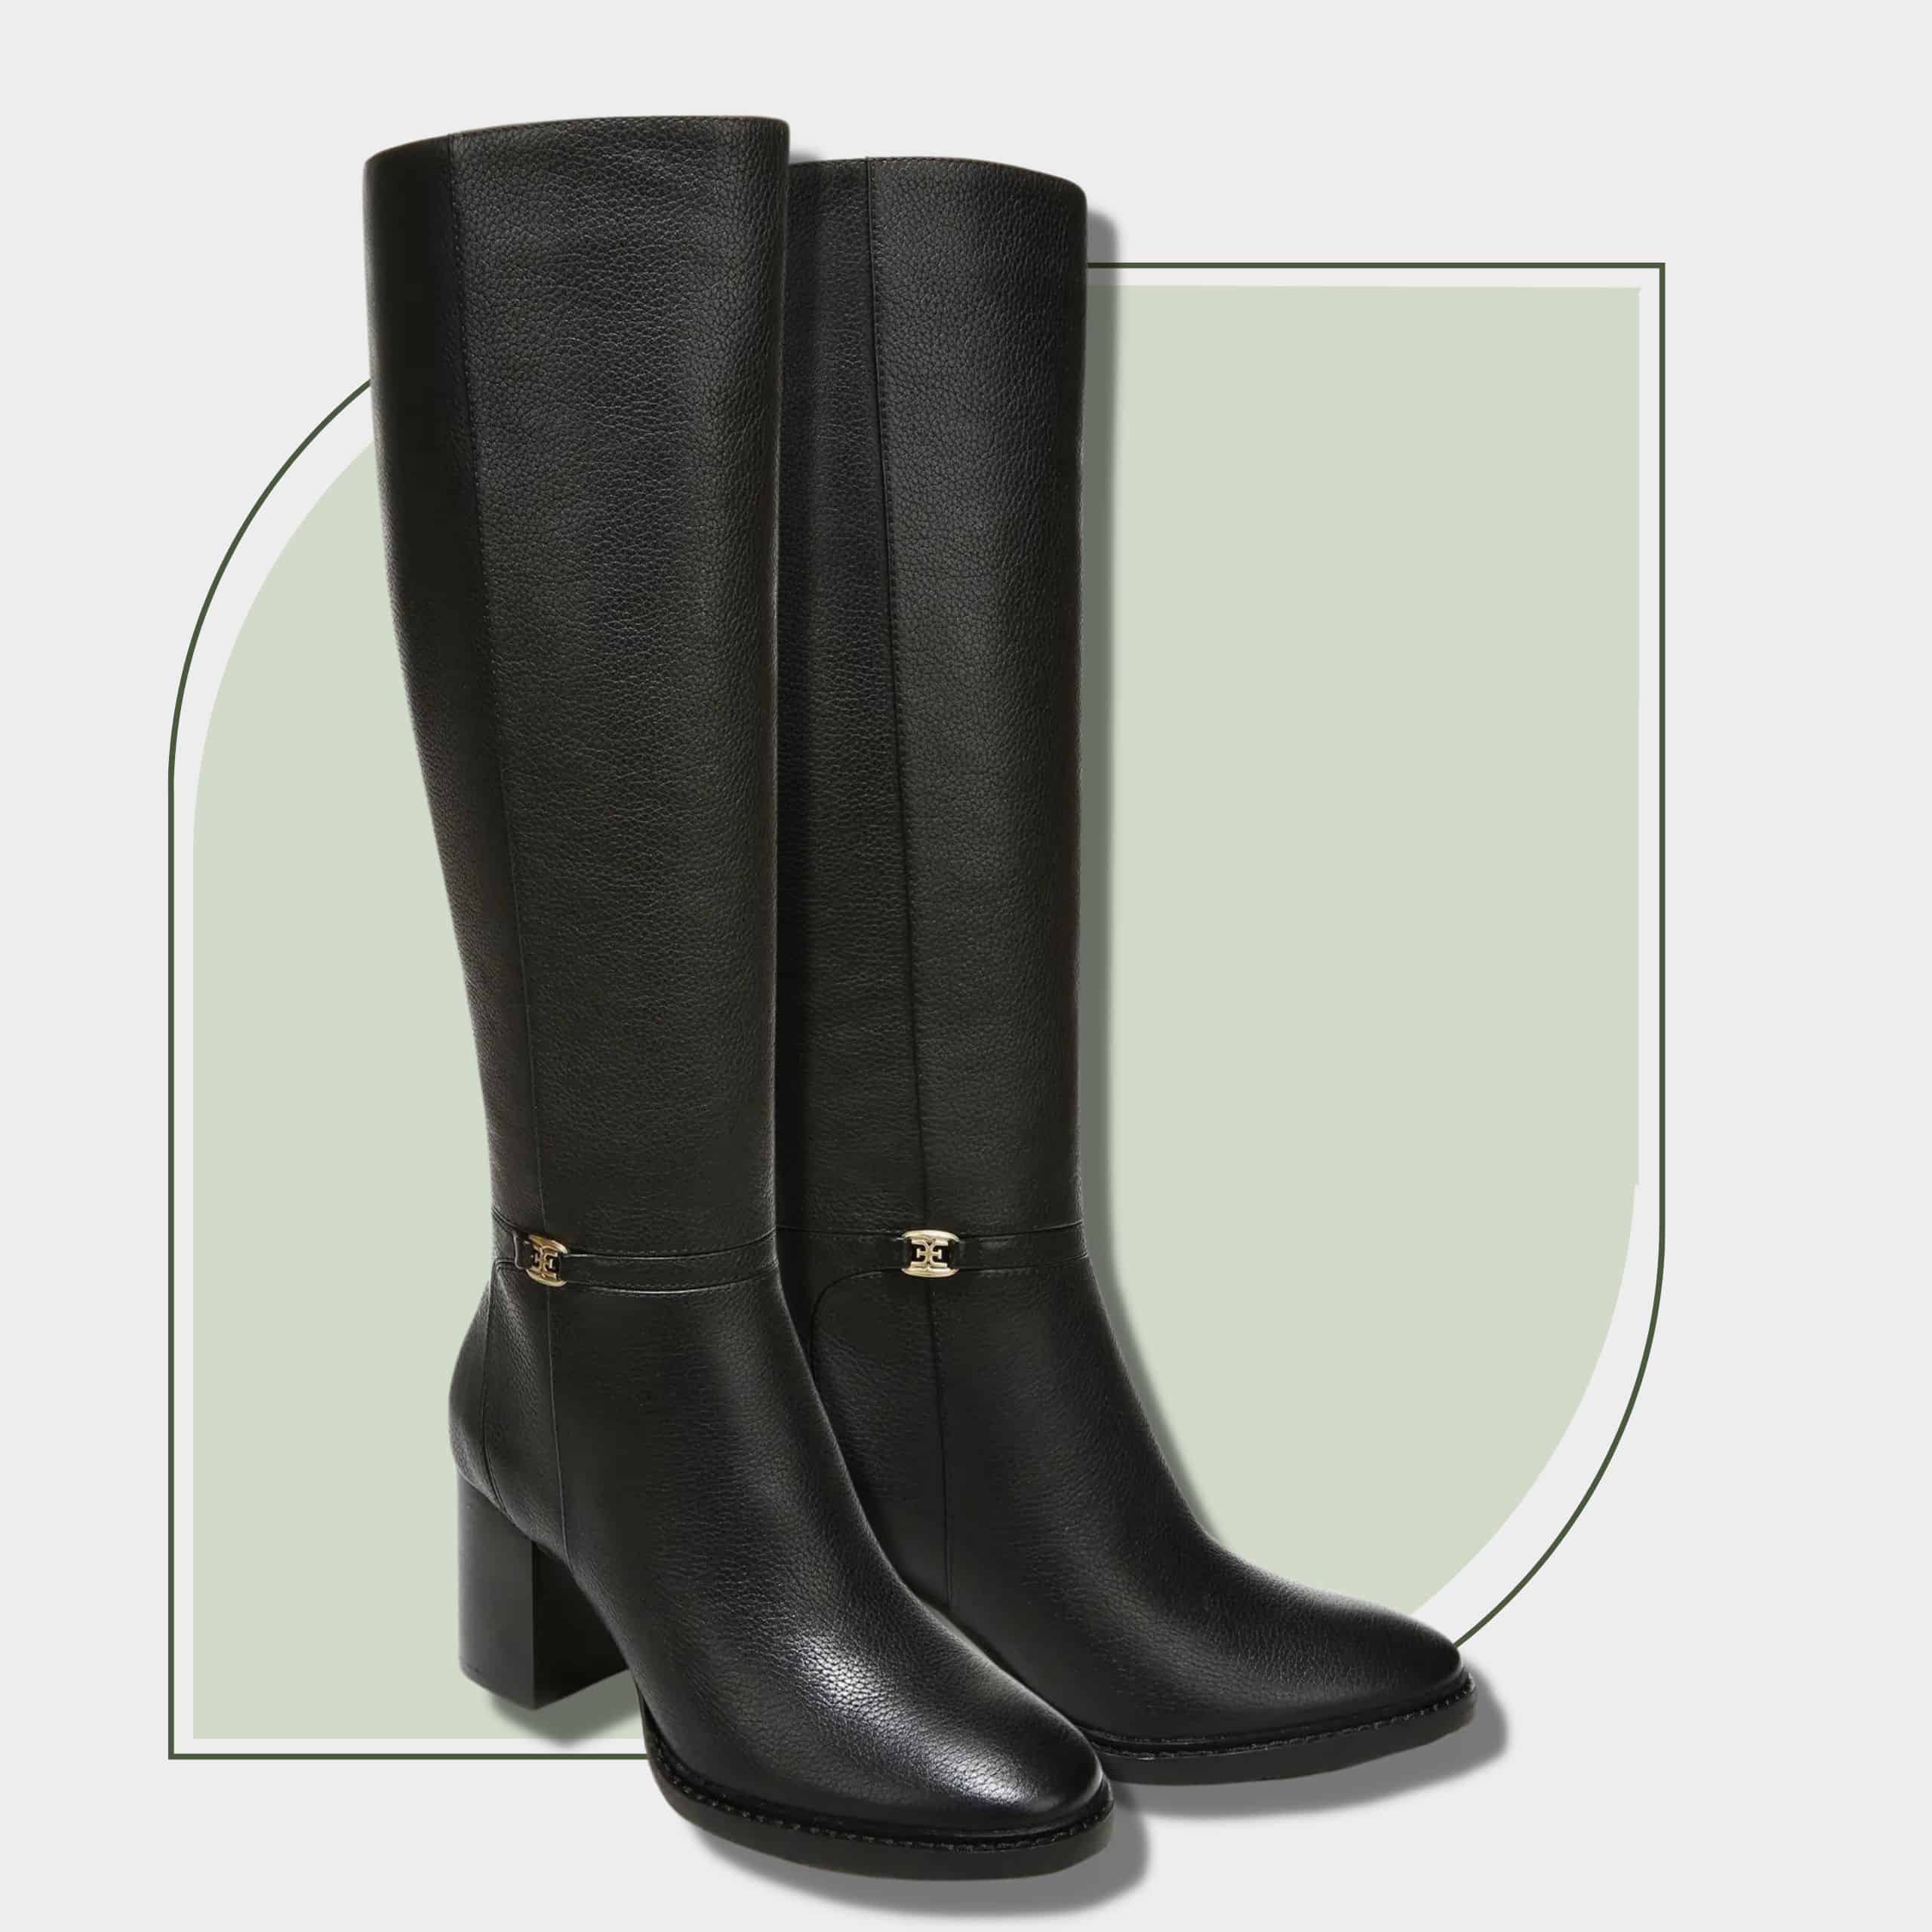 Effortless Chic Winter Capsule Wardrobe-Black Tall Boots